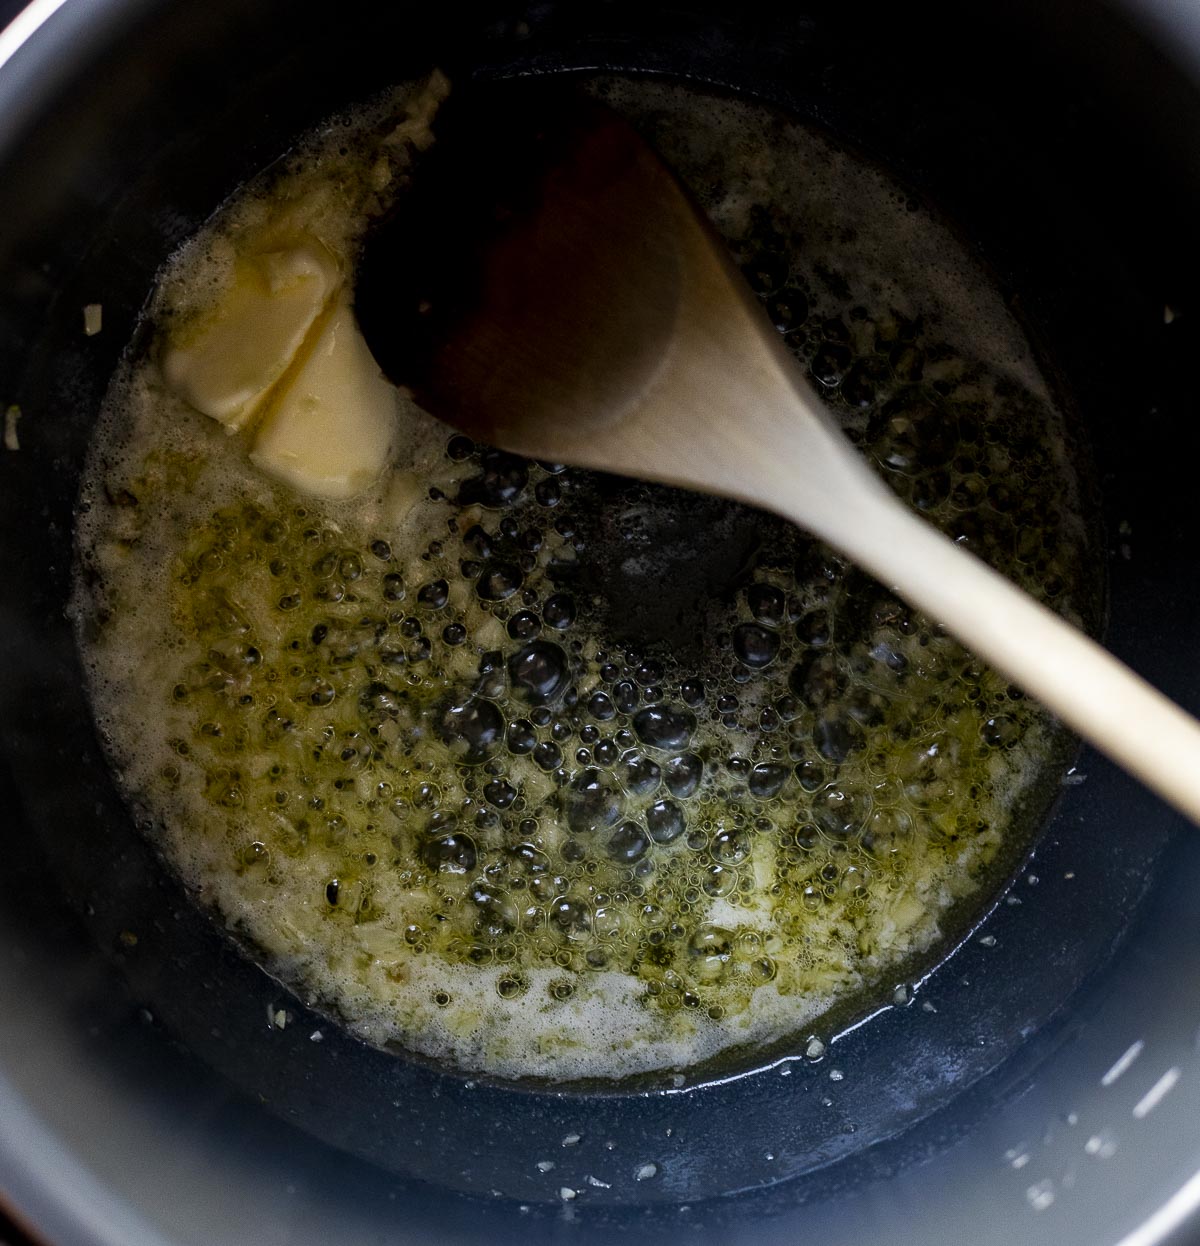 Garlic sautéing in butter and oil in the Instant Pot insert.